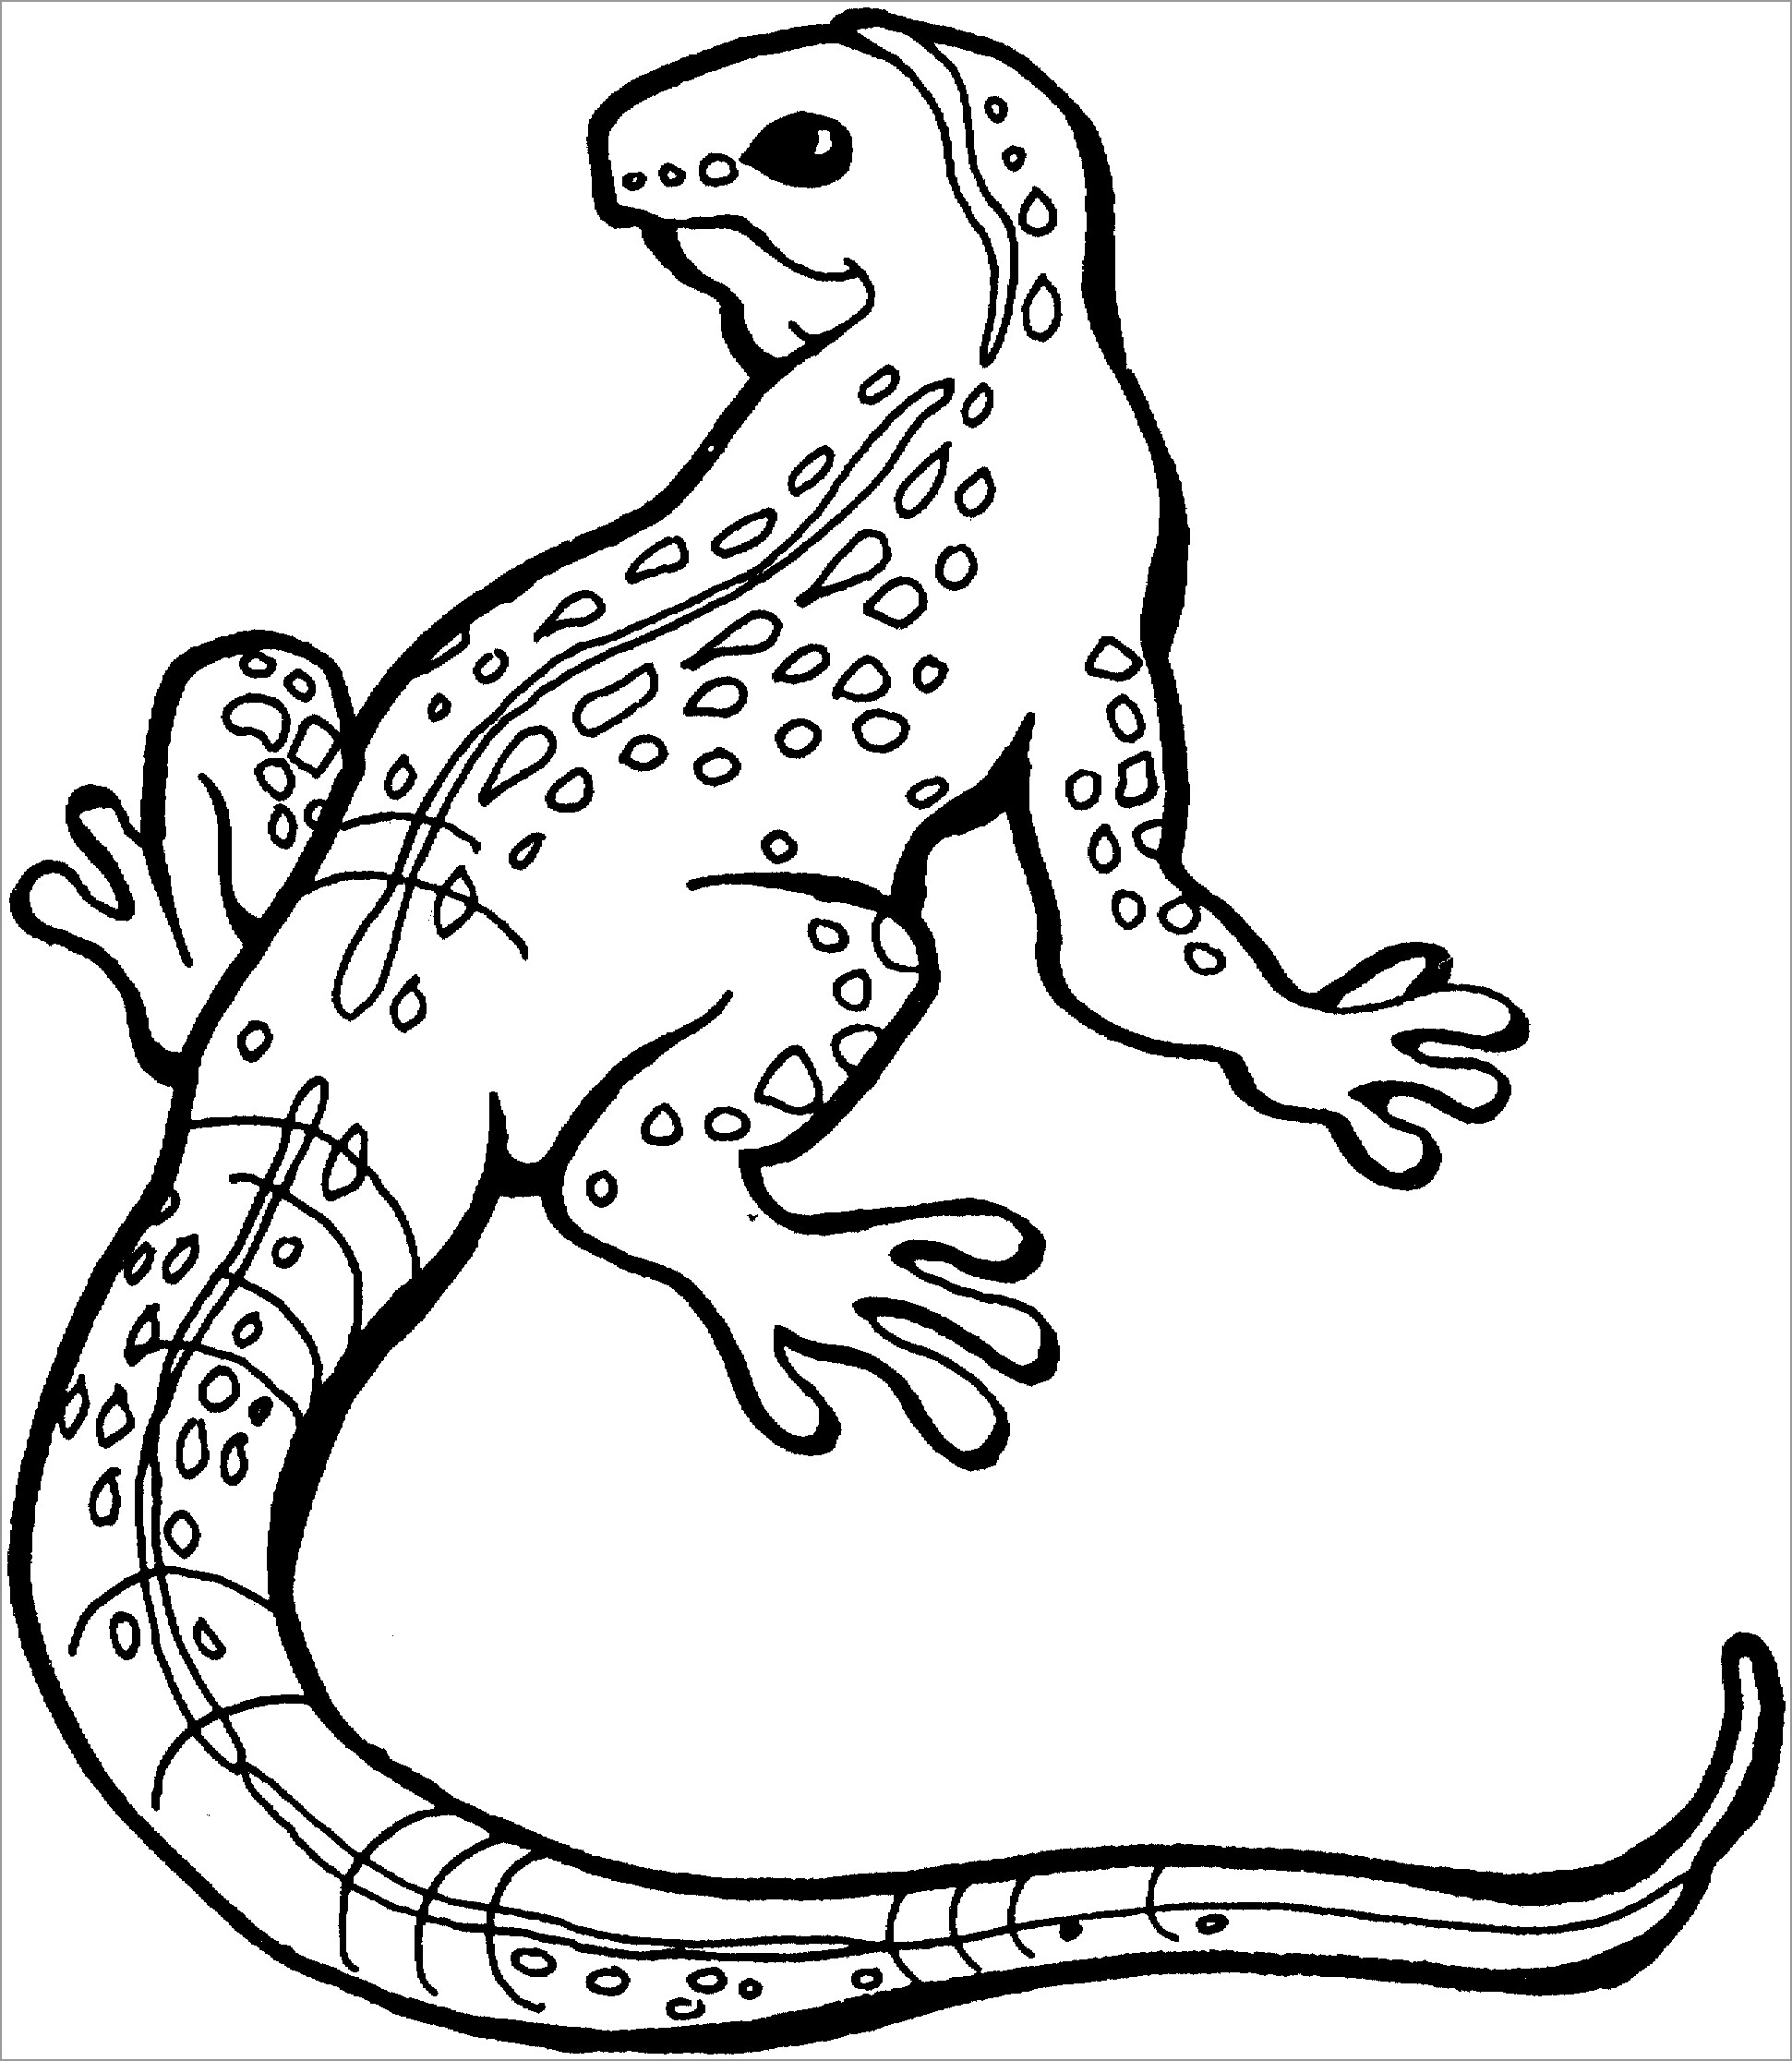 New Cute Lizard Coloring Pages with simple drawing